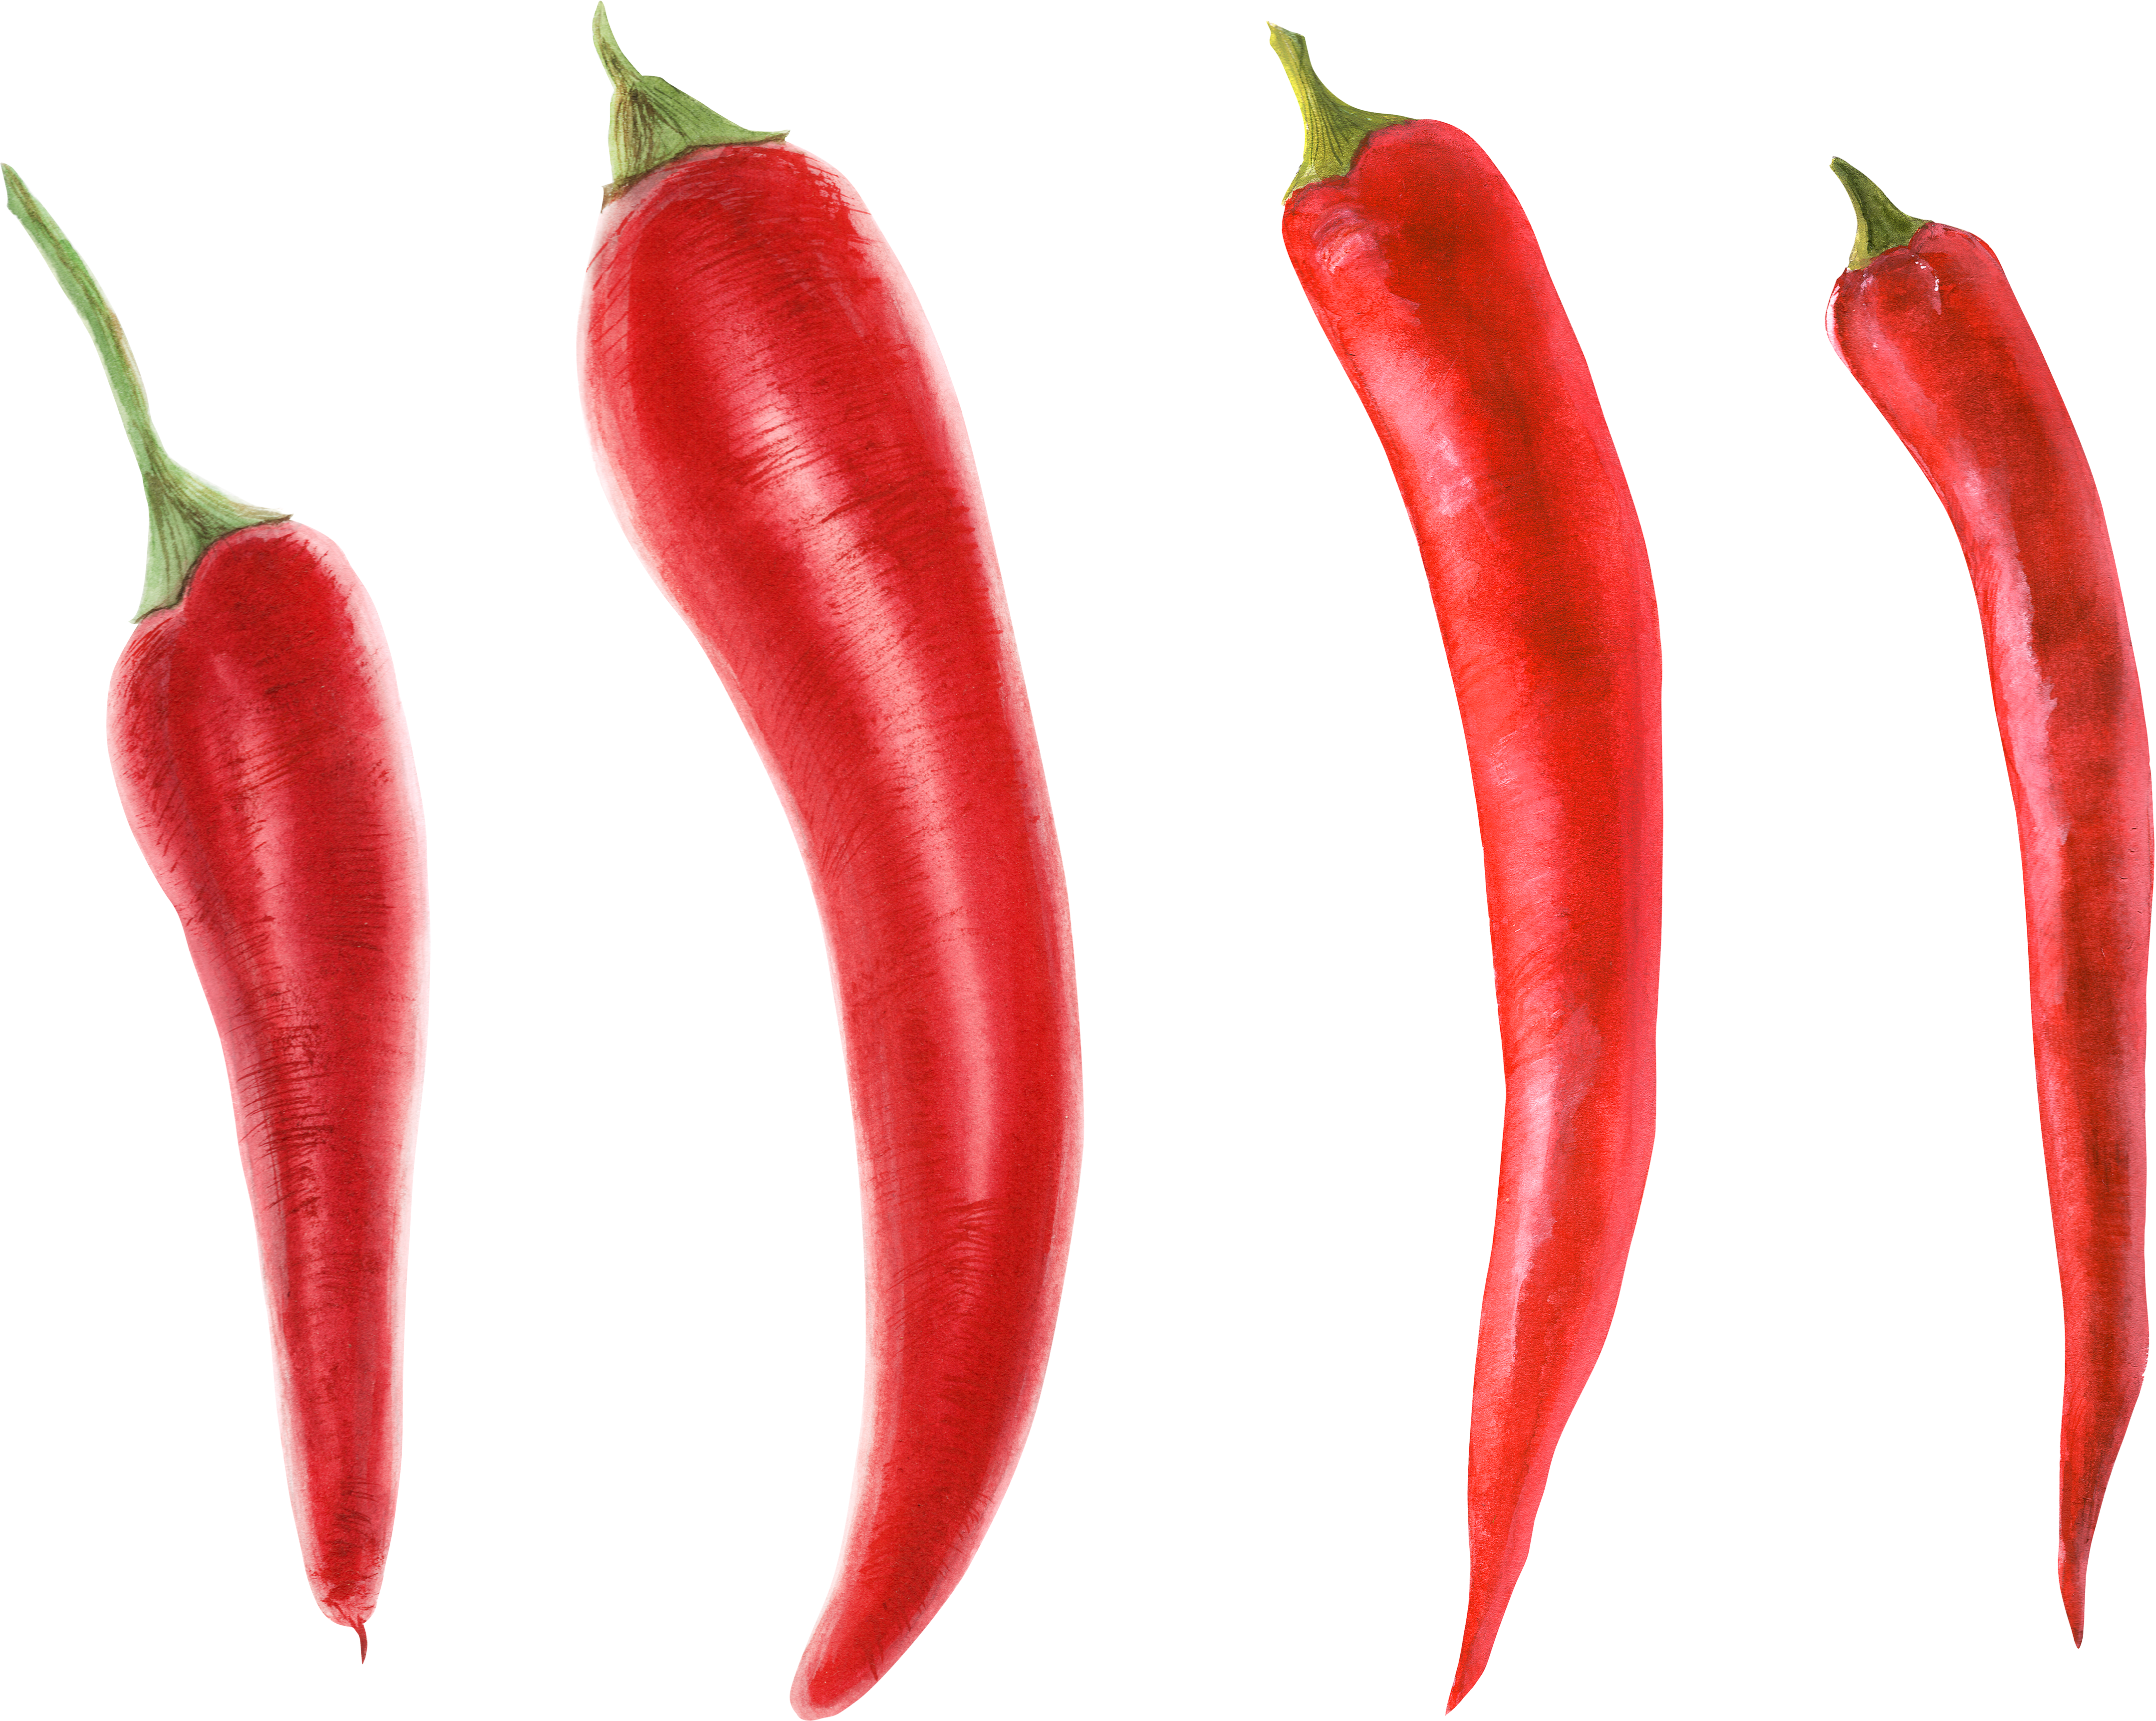 Chili Pepper PNG Transparent Images Free Download